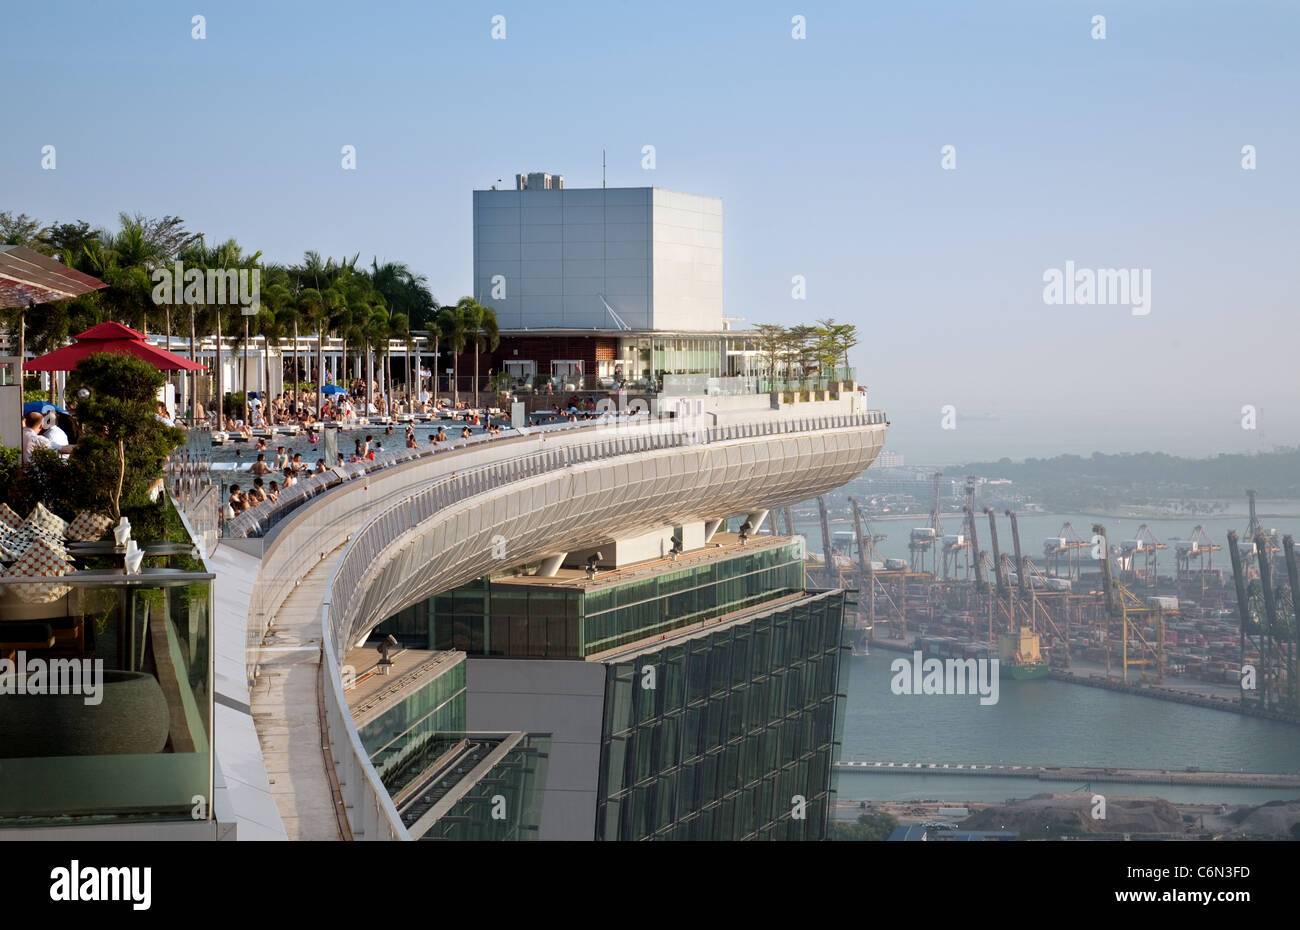 A view along the Skypark at the top of the Marina bay sands Hotel, Singapore Asia Stock Photo